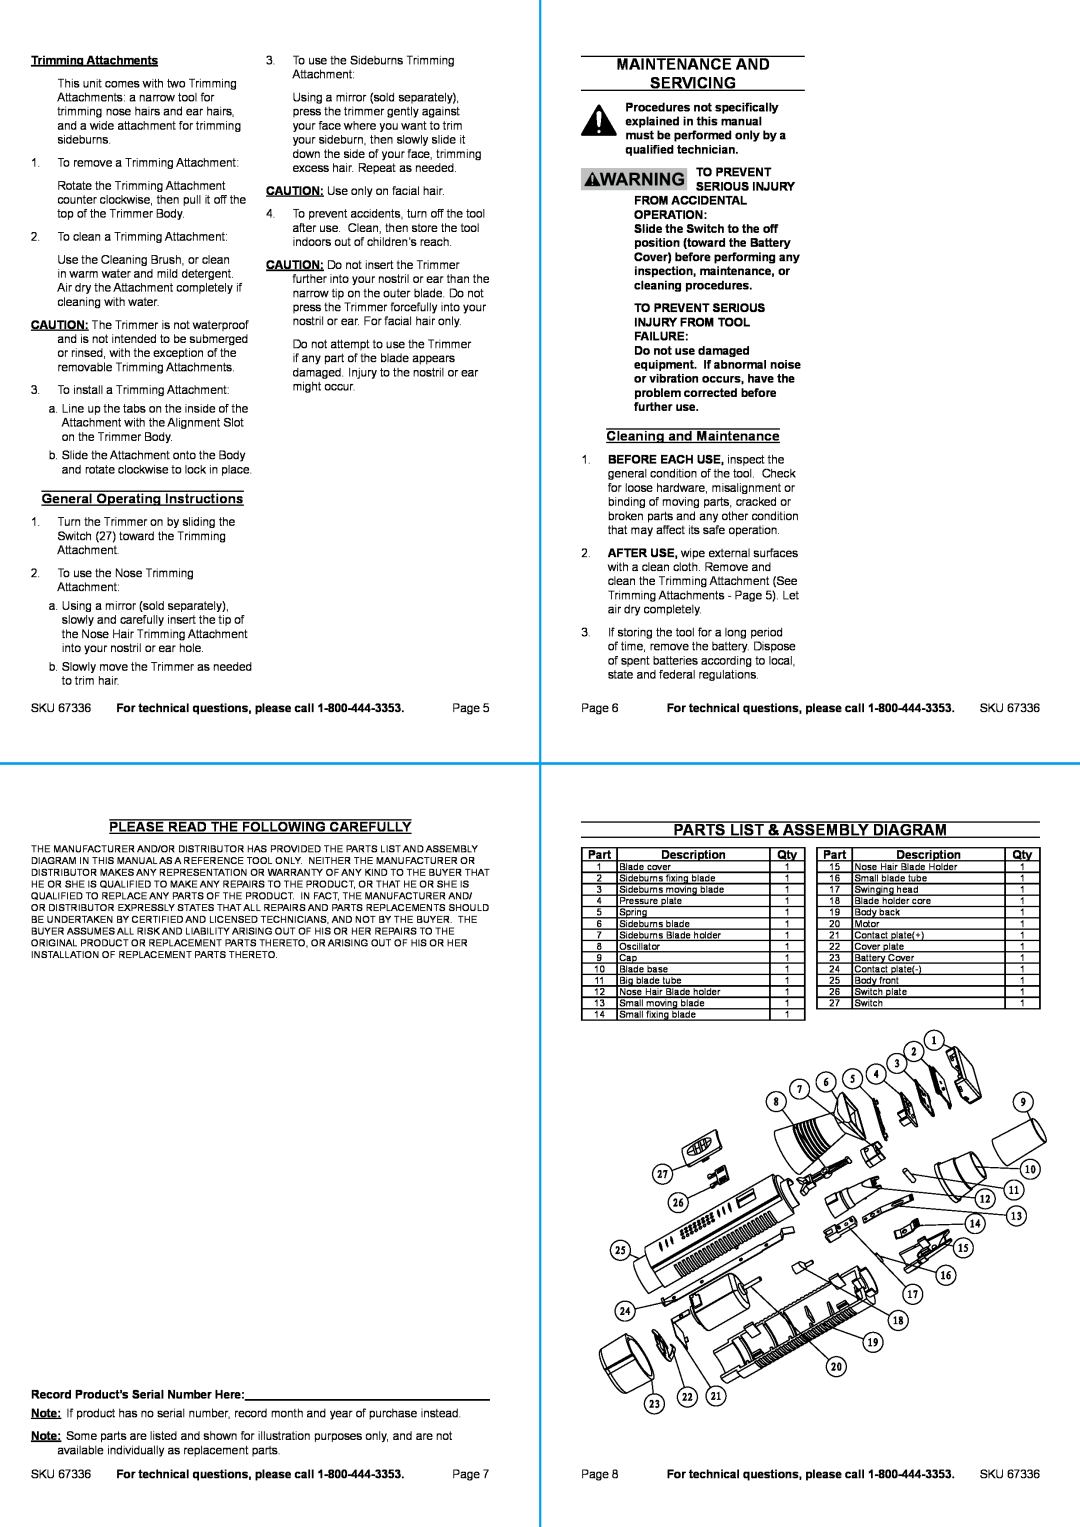 Harbor Freight Tools 67336 maintenance and, serVicing, Parts List & assEMBLY DiaGraM, Please Read The Following Carefully 